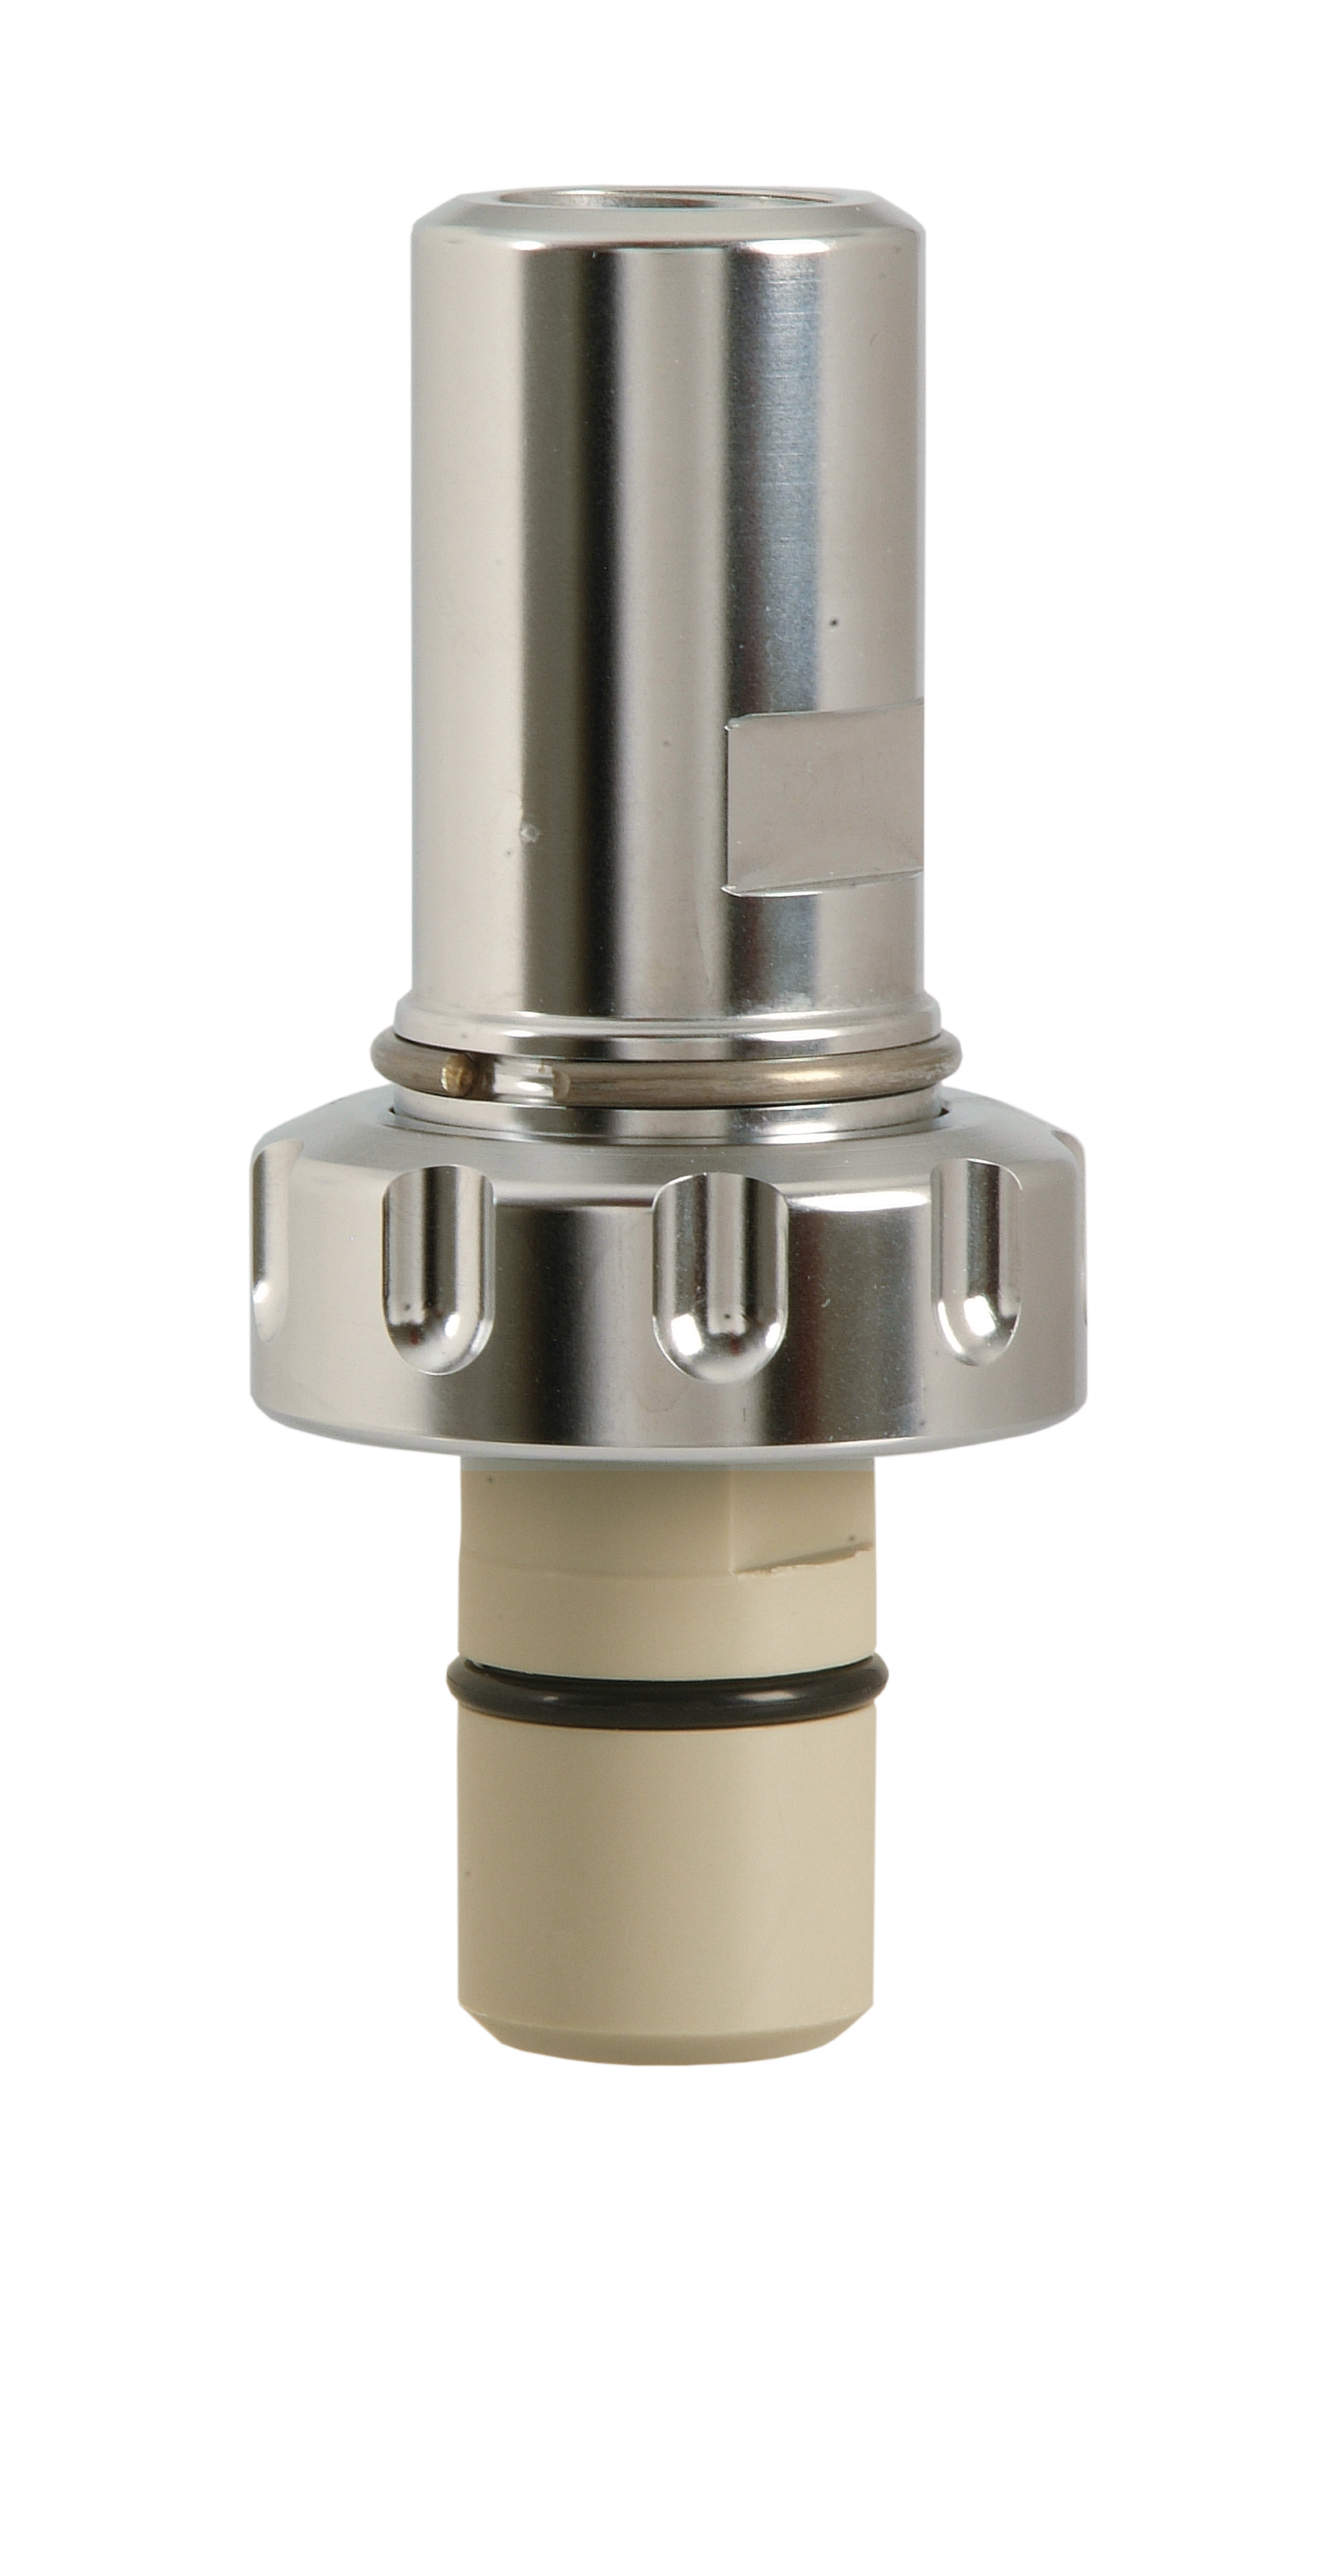 ARI106 (H) Inline Fitting | Modular | Stainless steel or highly resistant plastic | For 12-mm sensors | For chemical and hygienic applications